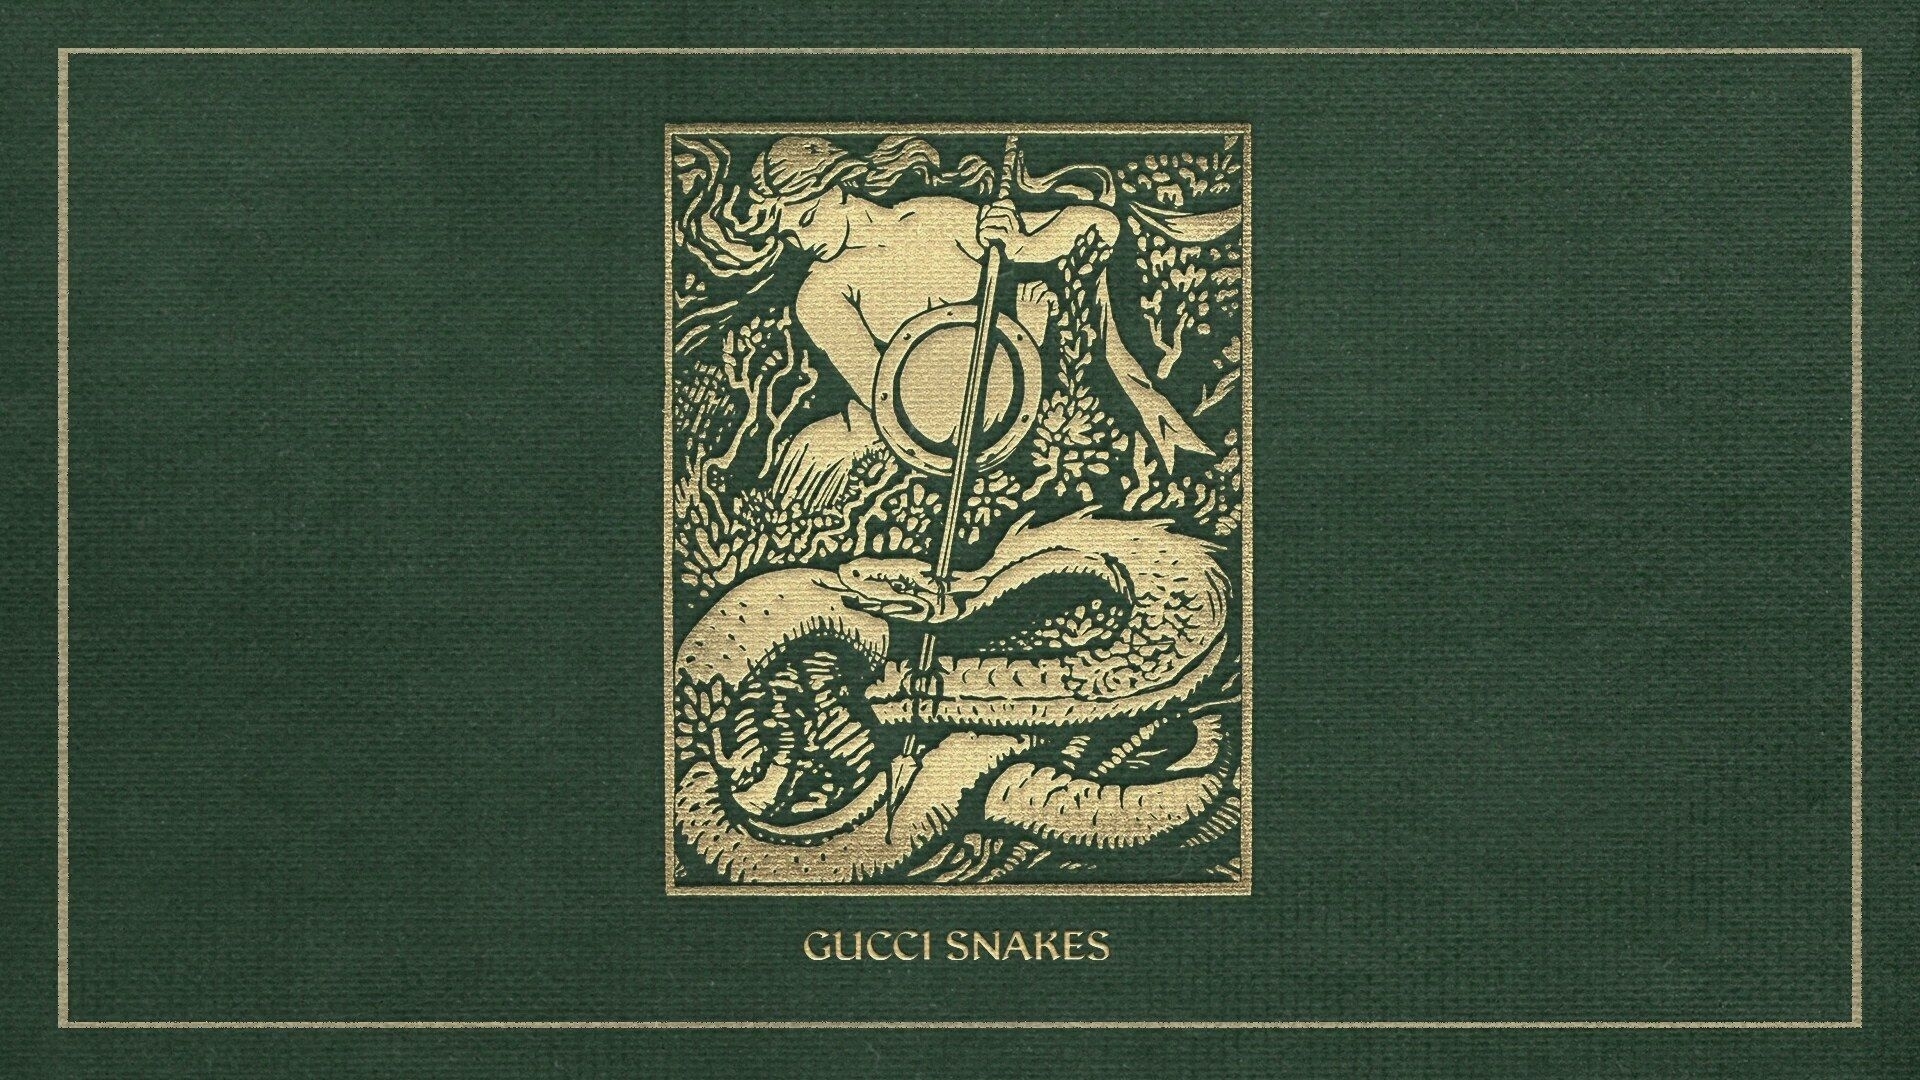 Download The Most Beautiful Gucci Snake Wallpaper 840 X 840